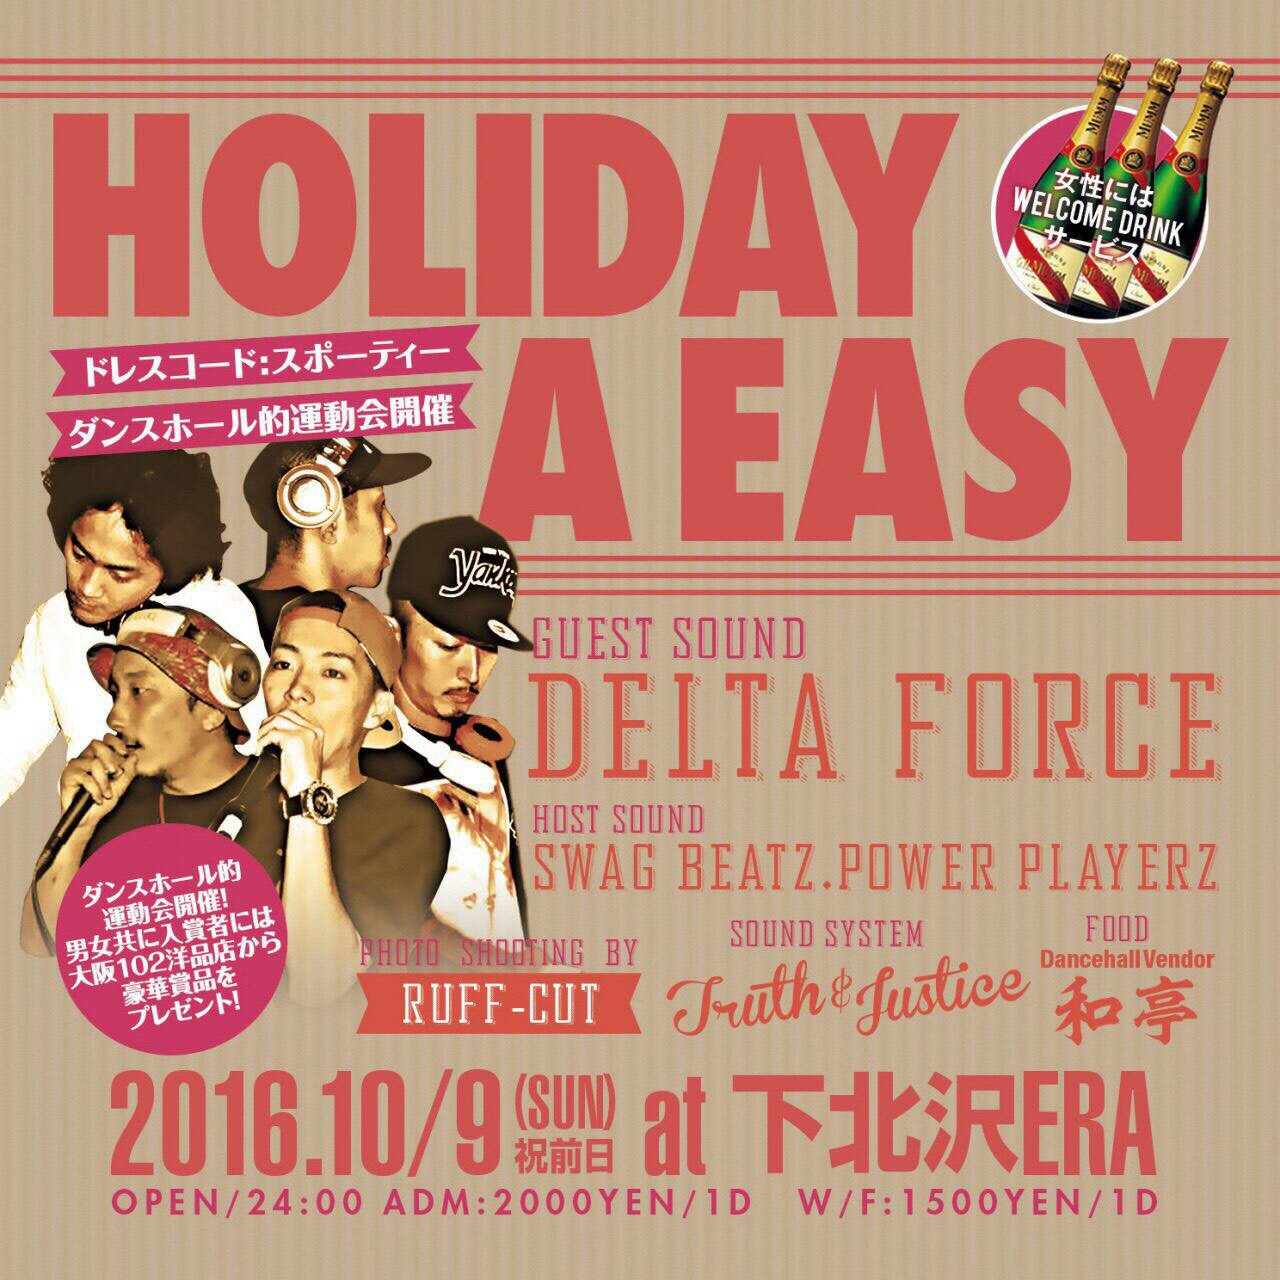 10/9(sun) Holiday A Easy ＠下北沢ERA - Special competition like a Jamaica -